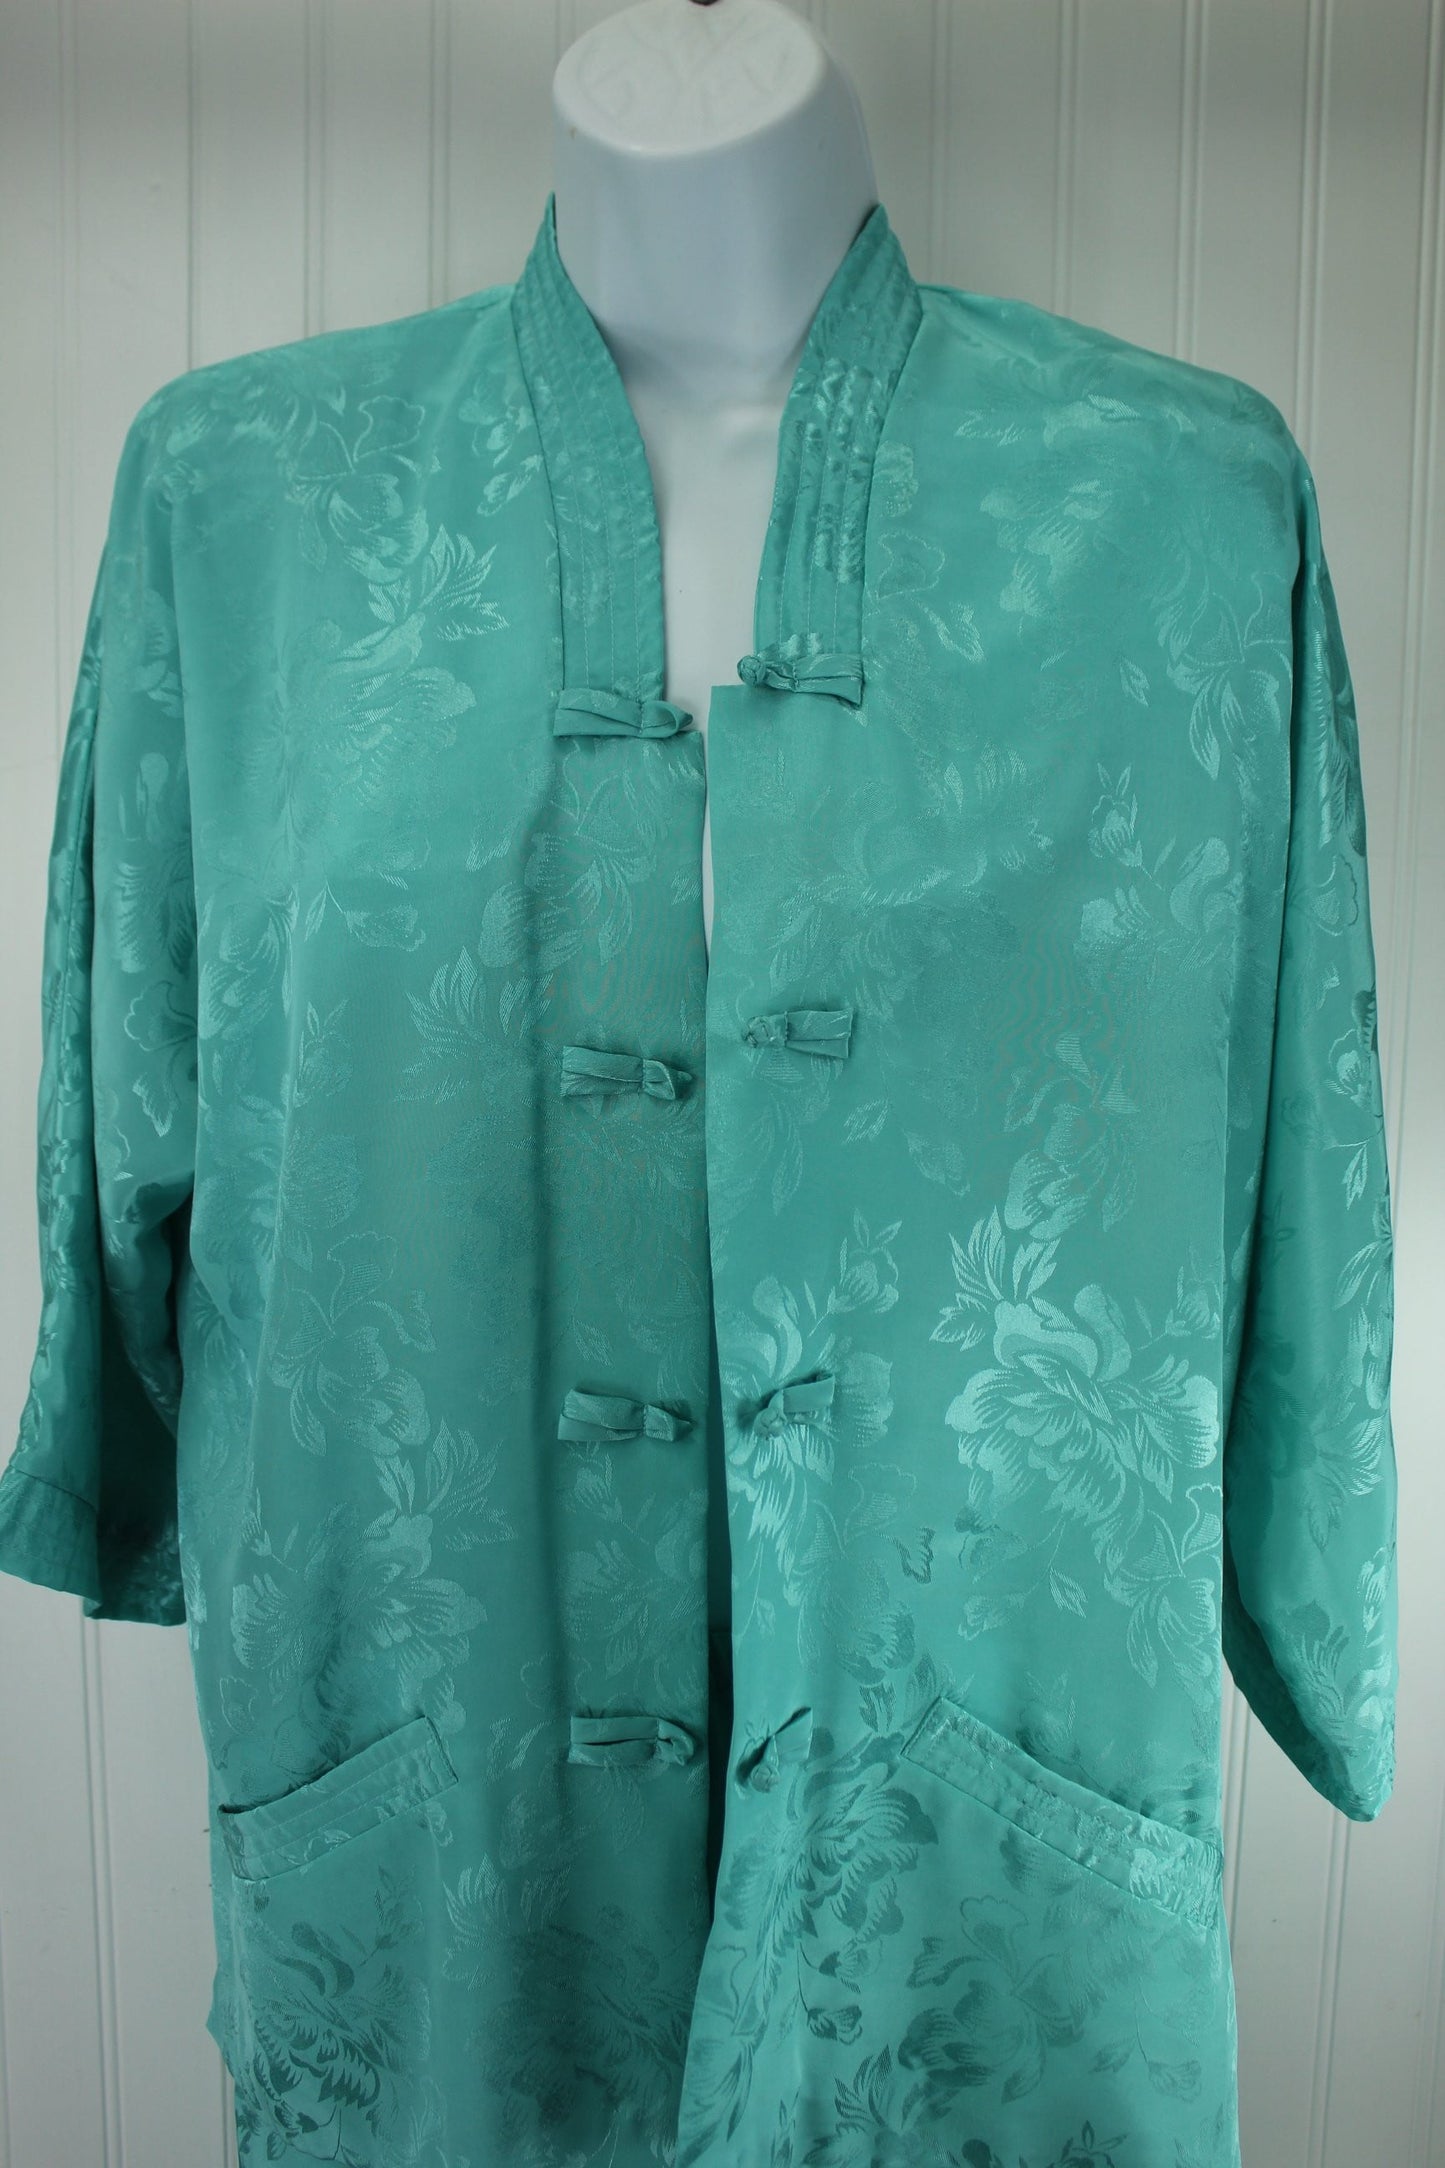 Polynesian Casuals Hawaii Charming Vintage Lounge Pants Suit  - Turquoise Aqua Polyester probably size 10 current